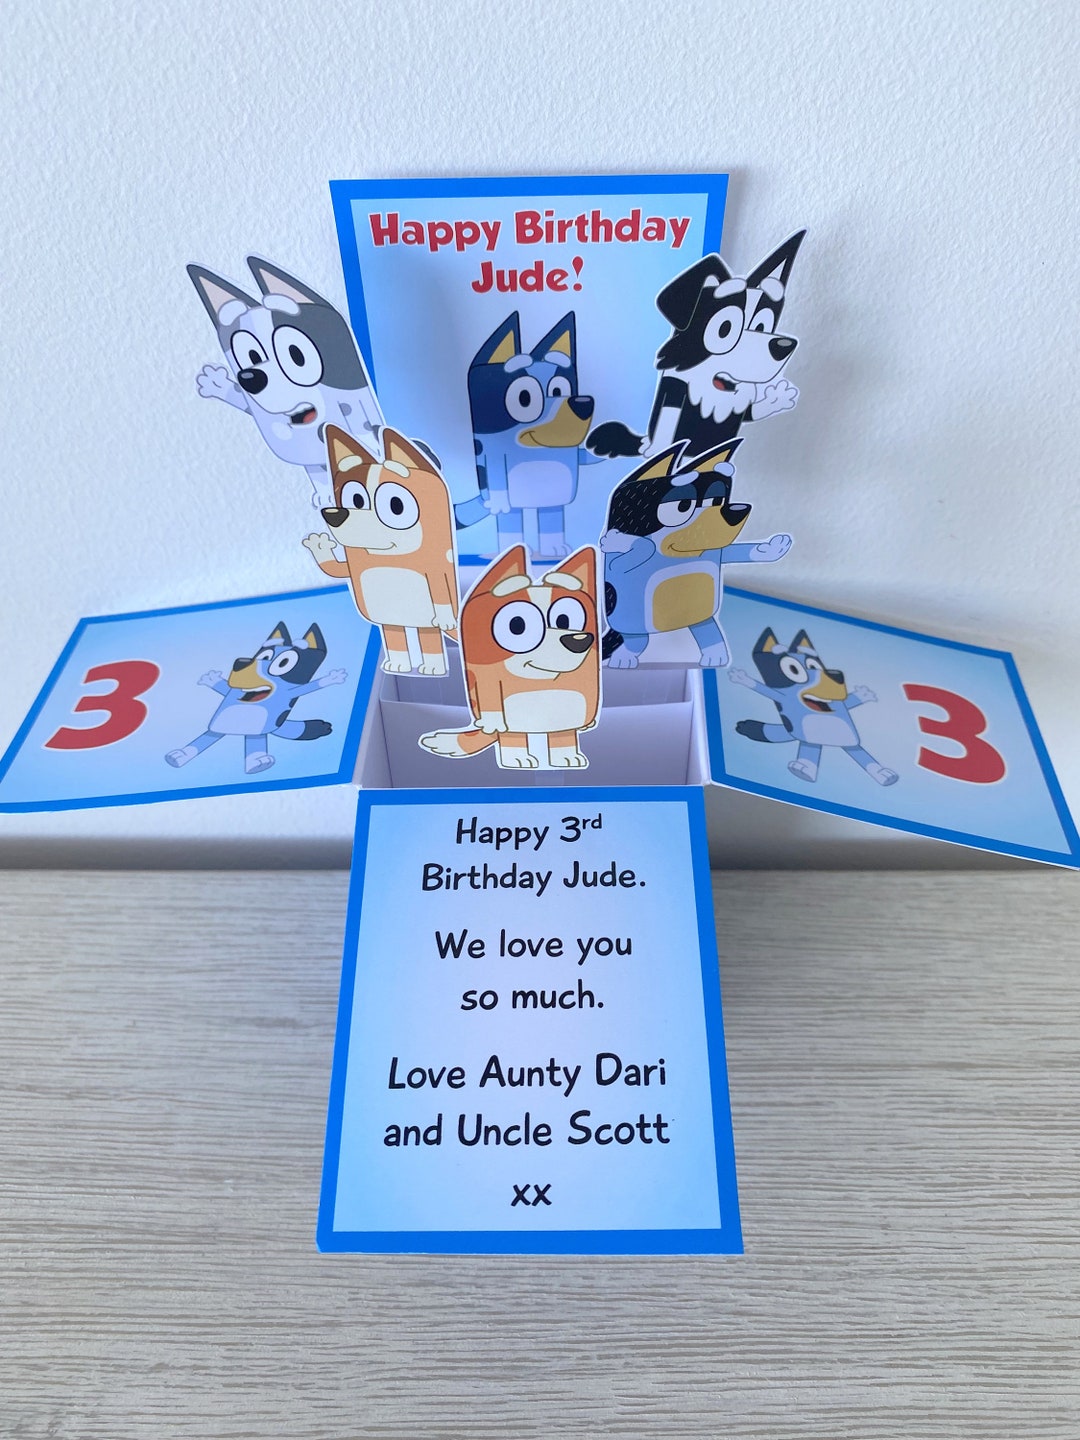 I made a Bluey themed card for my daughter's lunch box : r/bluey